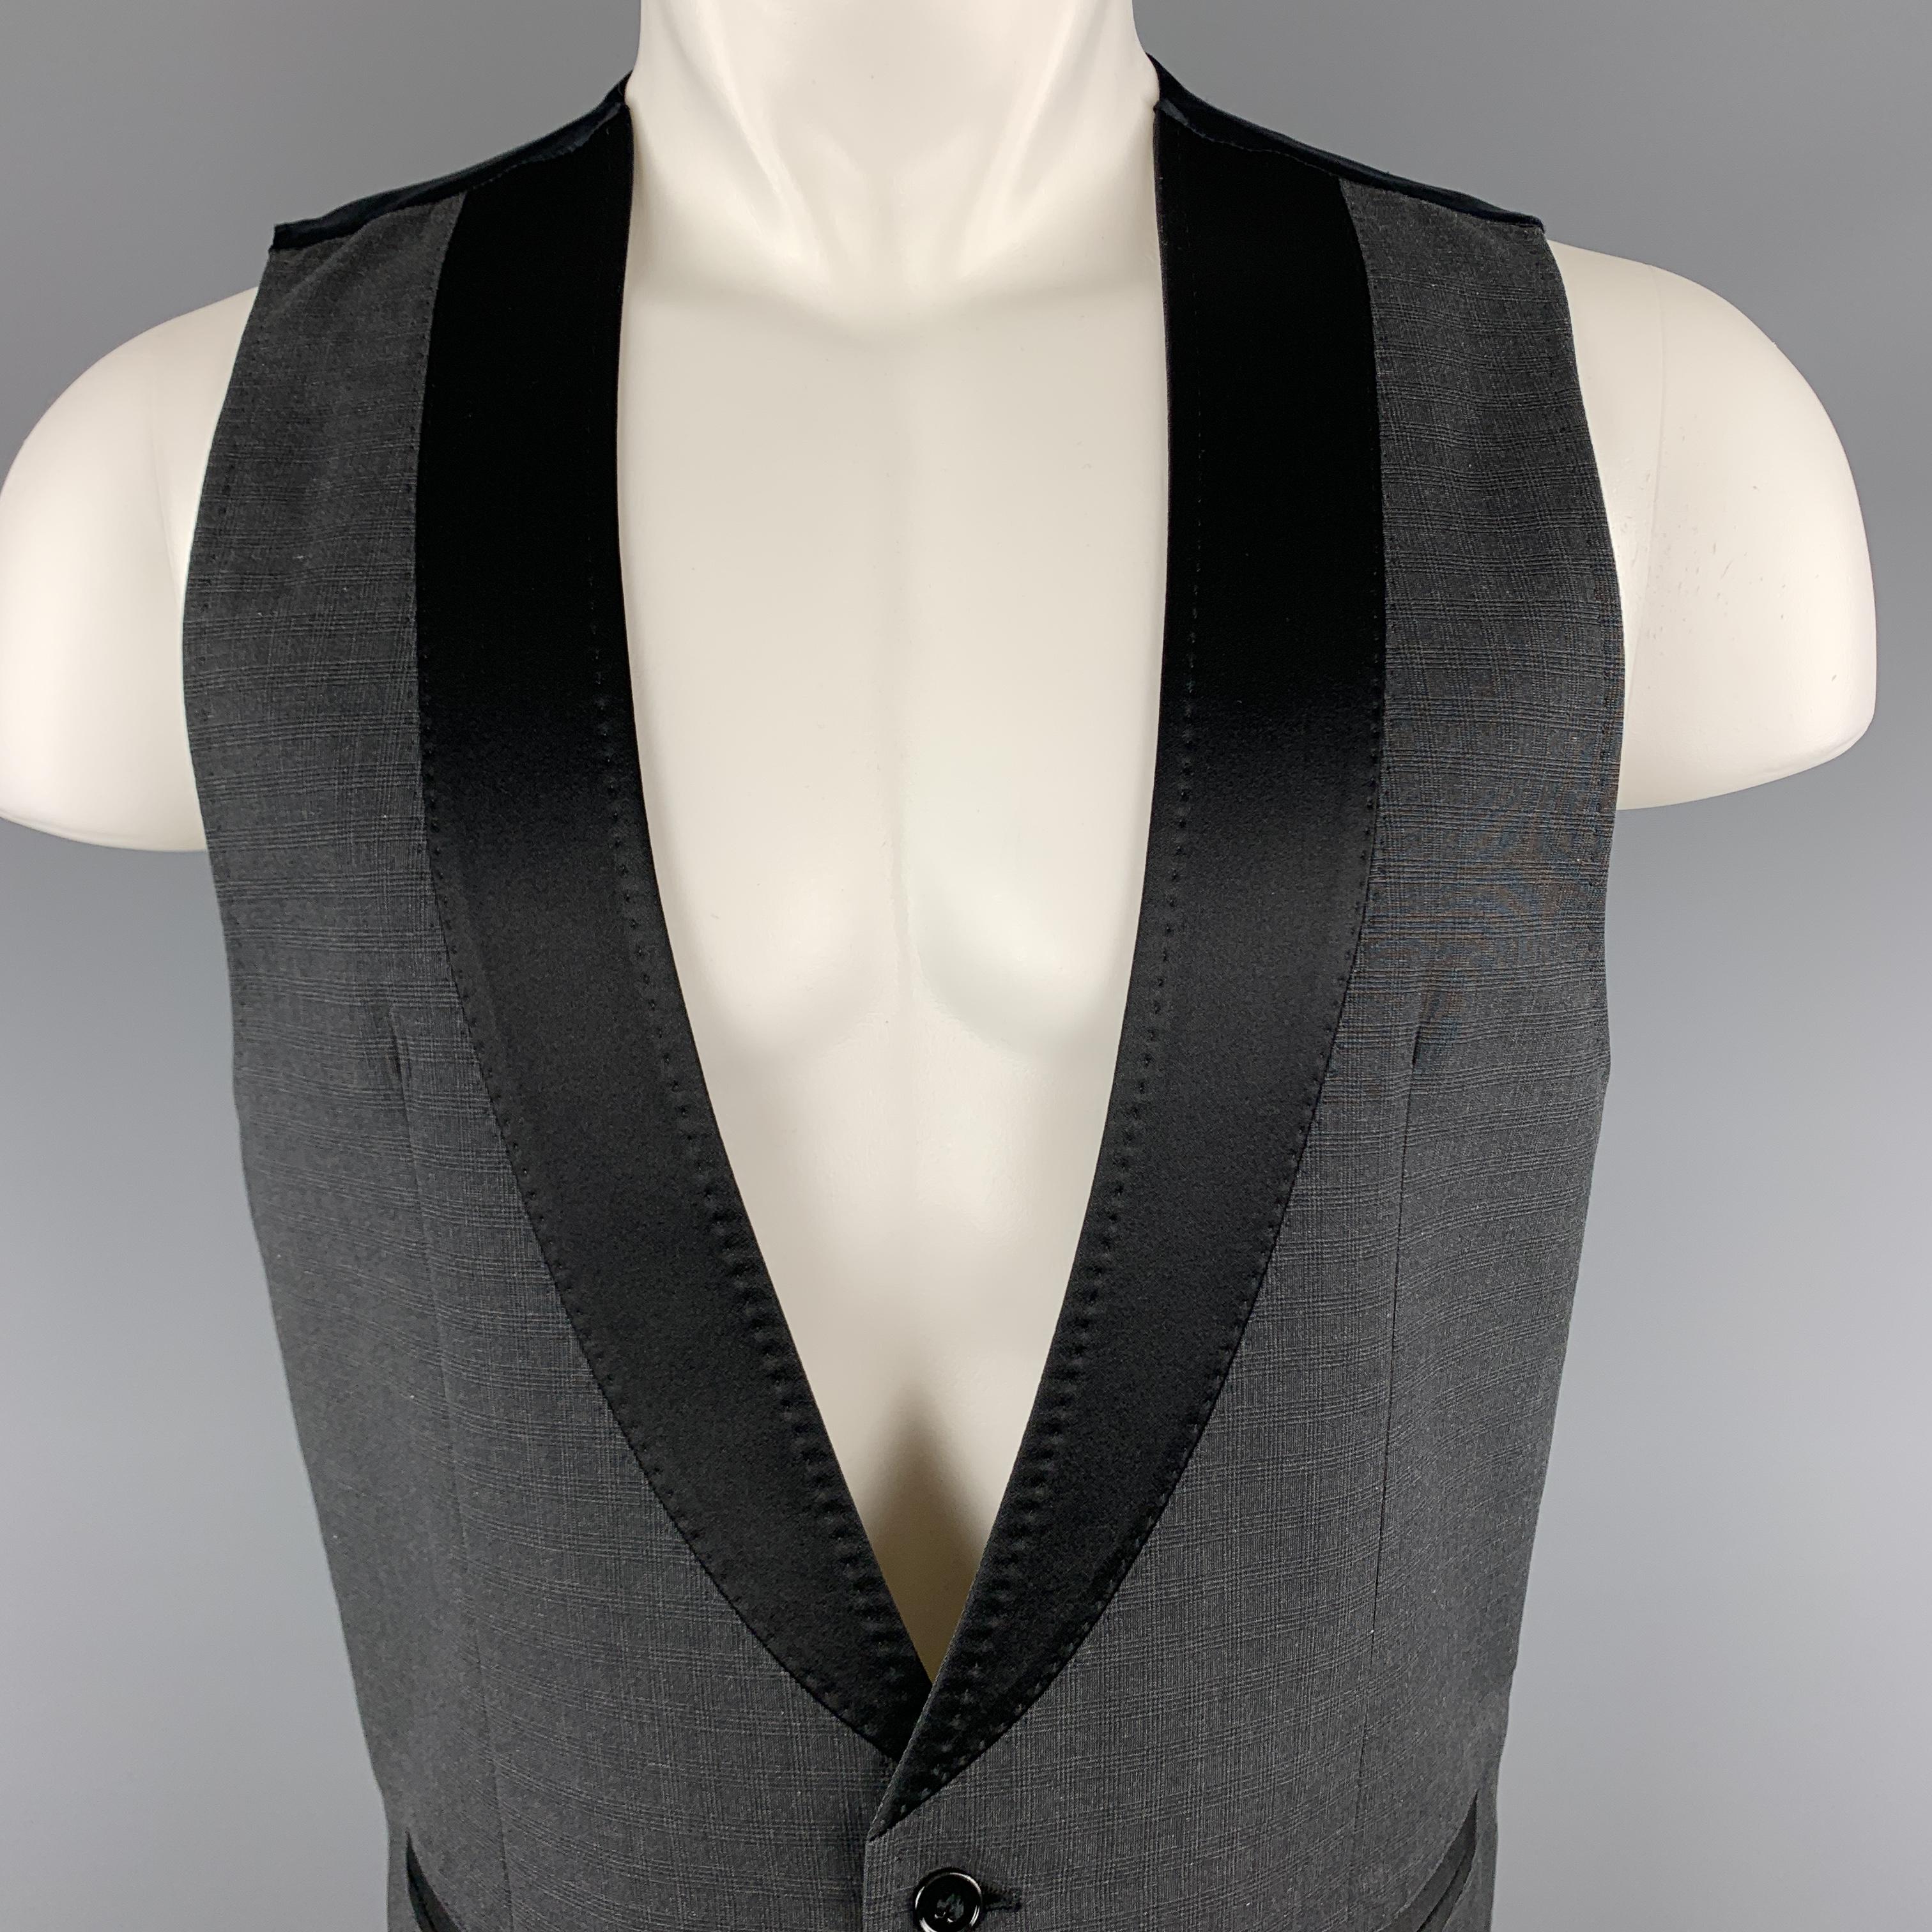 DOLCE & GABBAN tuxedo vest comes in charcoal plaid cotton with a silk blend mock shawl collar. Minor wear on back. As-is. Made in Italy.

Very Good Pre-Owned Condition.
Marked: IT 50

Measurements:

Shoulder: 13.5 in.
Chest: 39 in.
Length: 27 in.